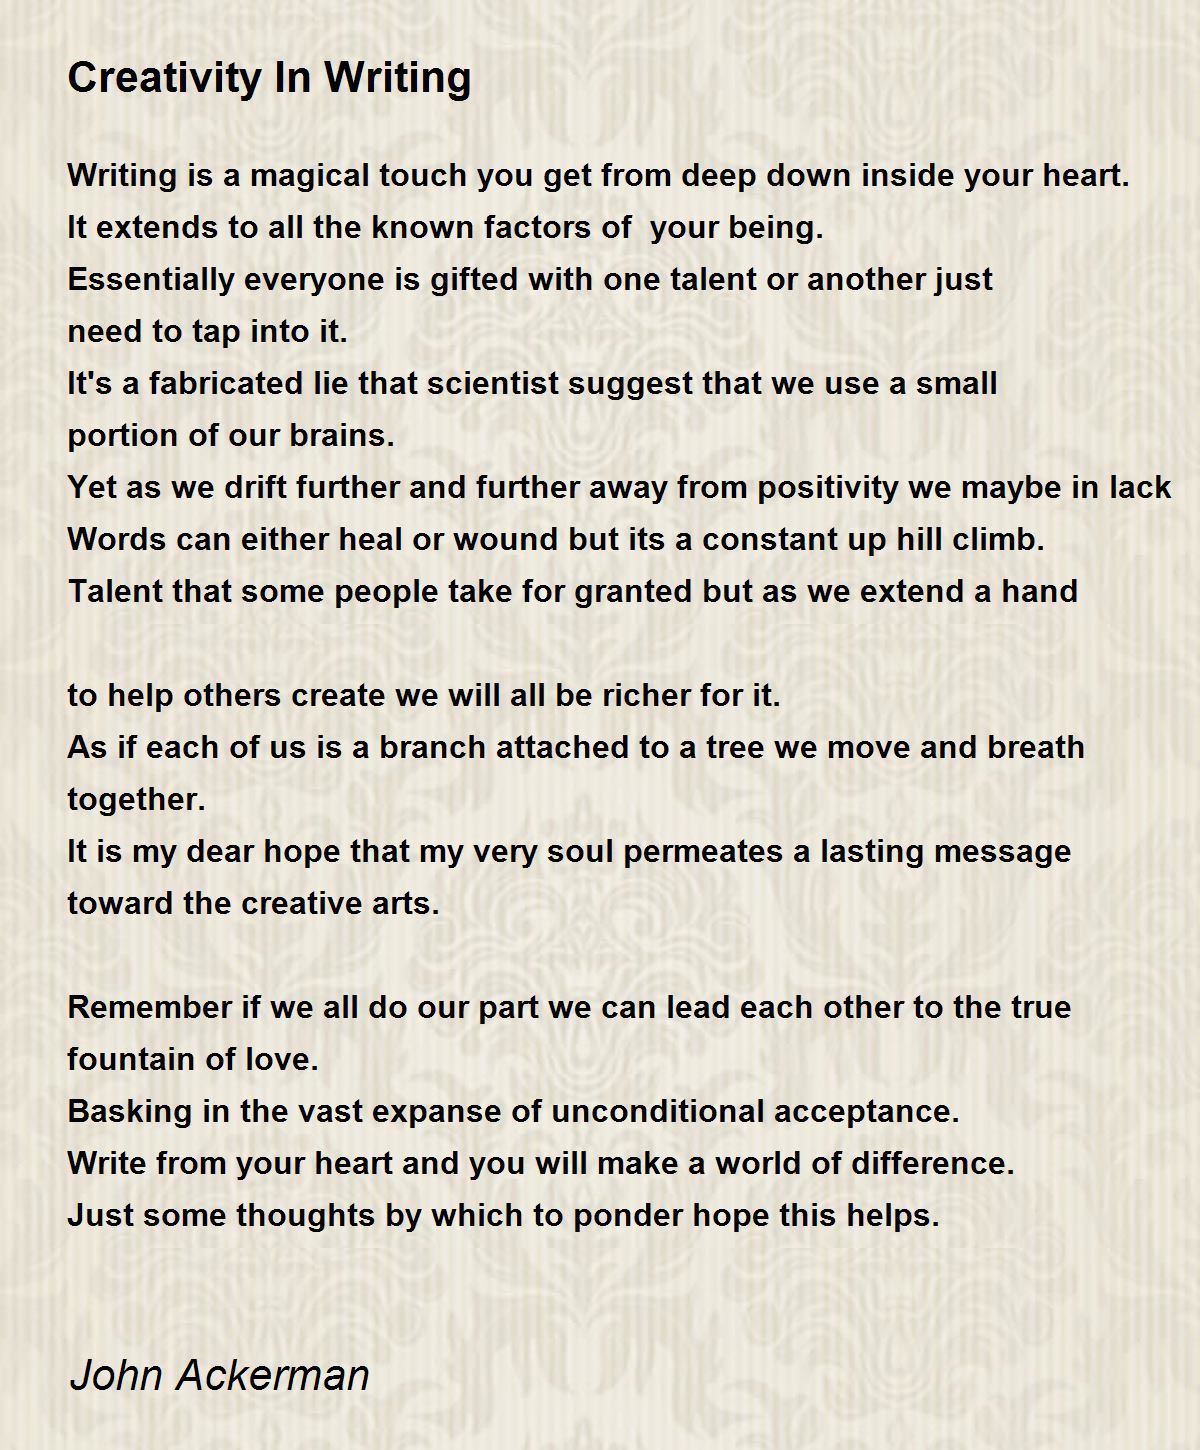 poem about creative writing subject